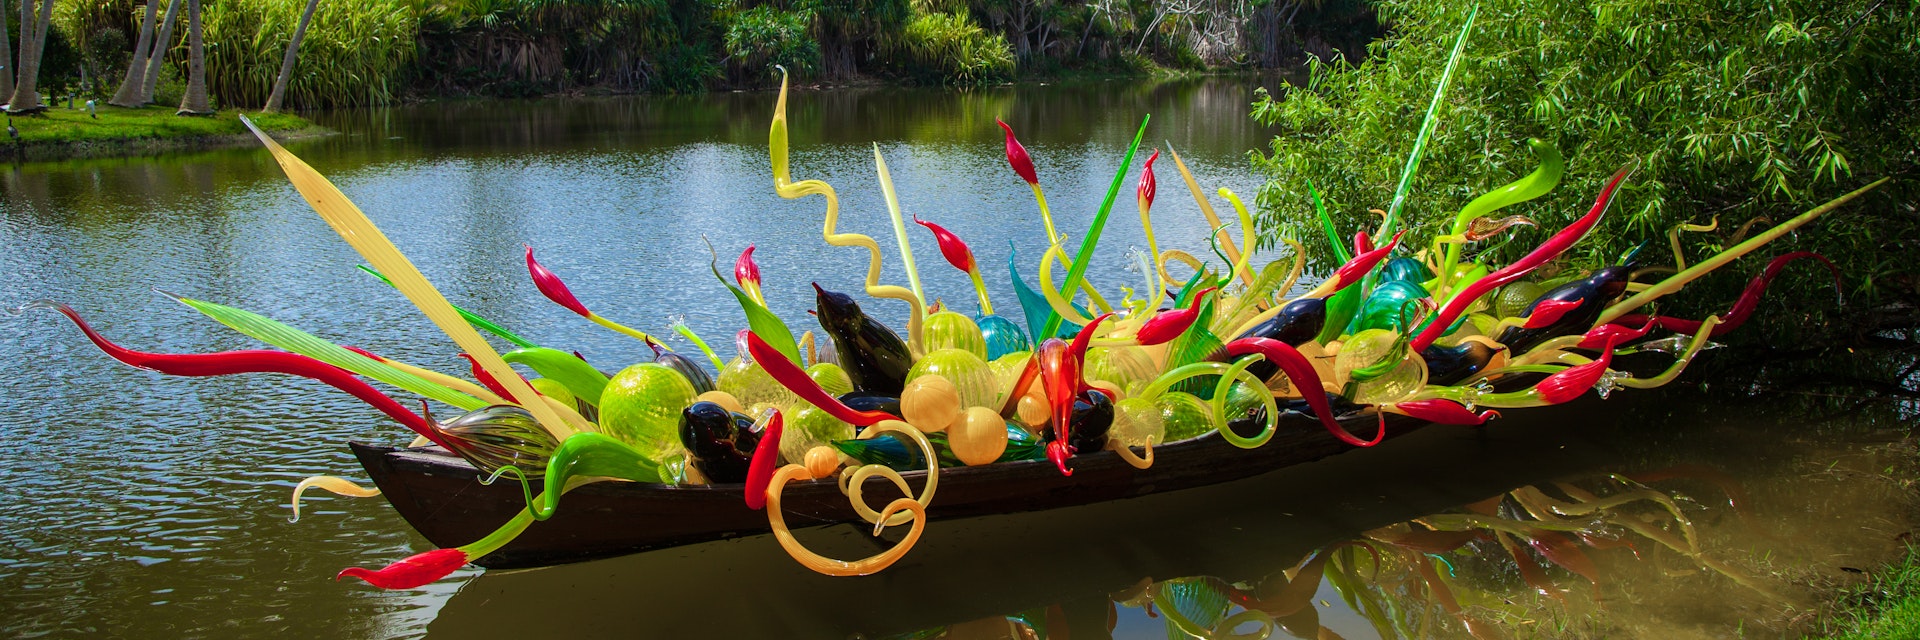 Dale Chihuly Exhibition at Fairchild Tropical Garden ;